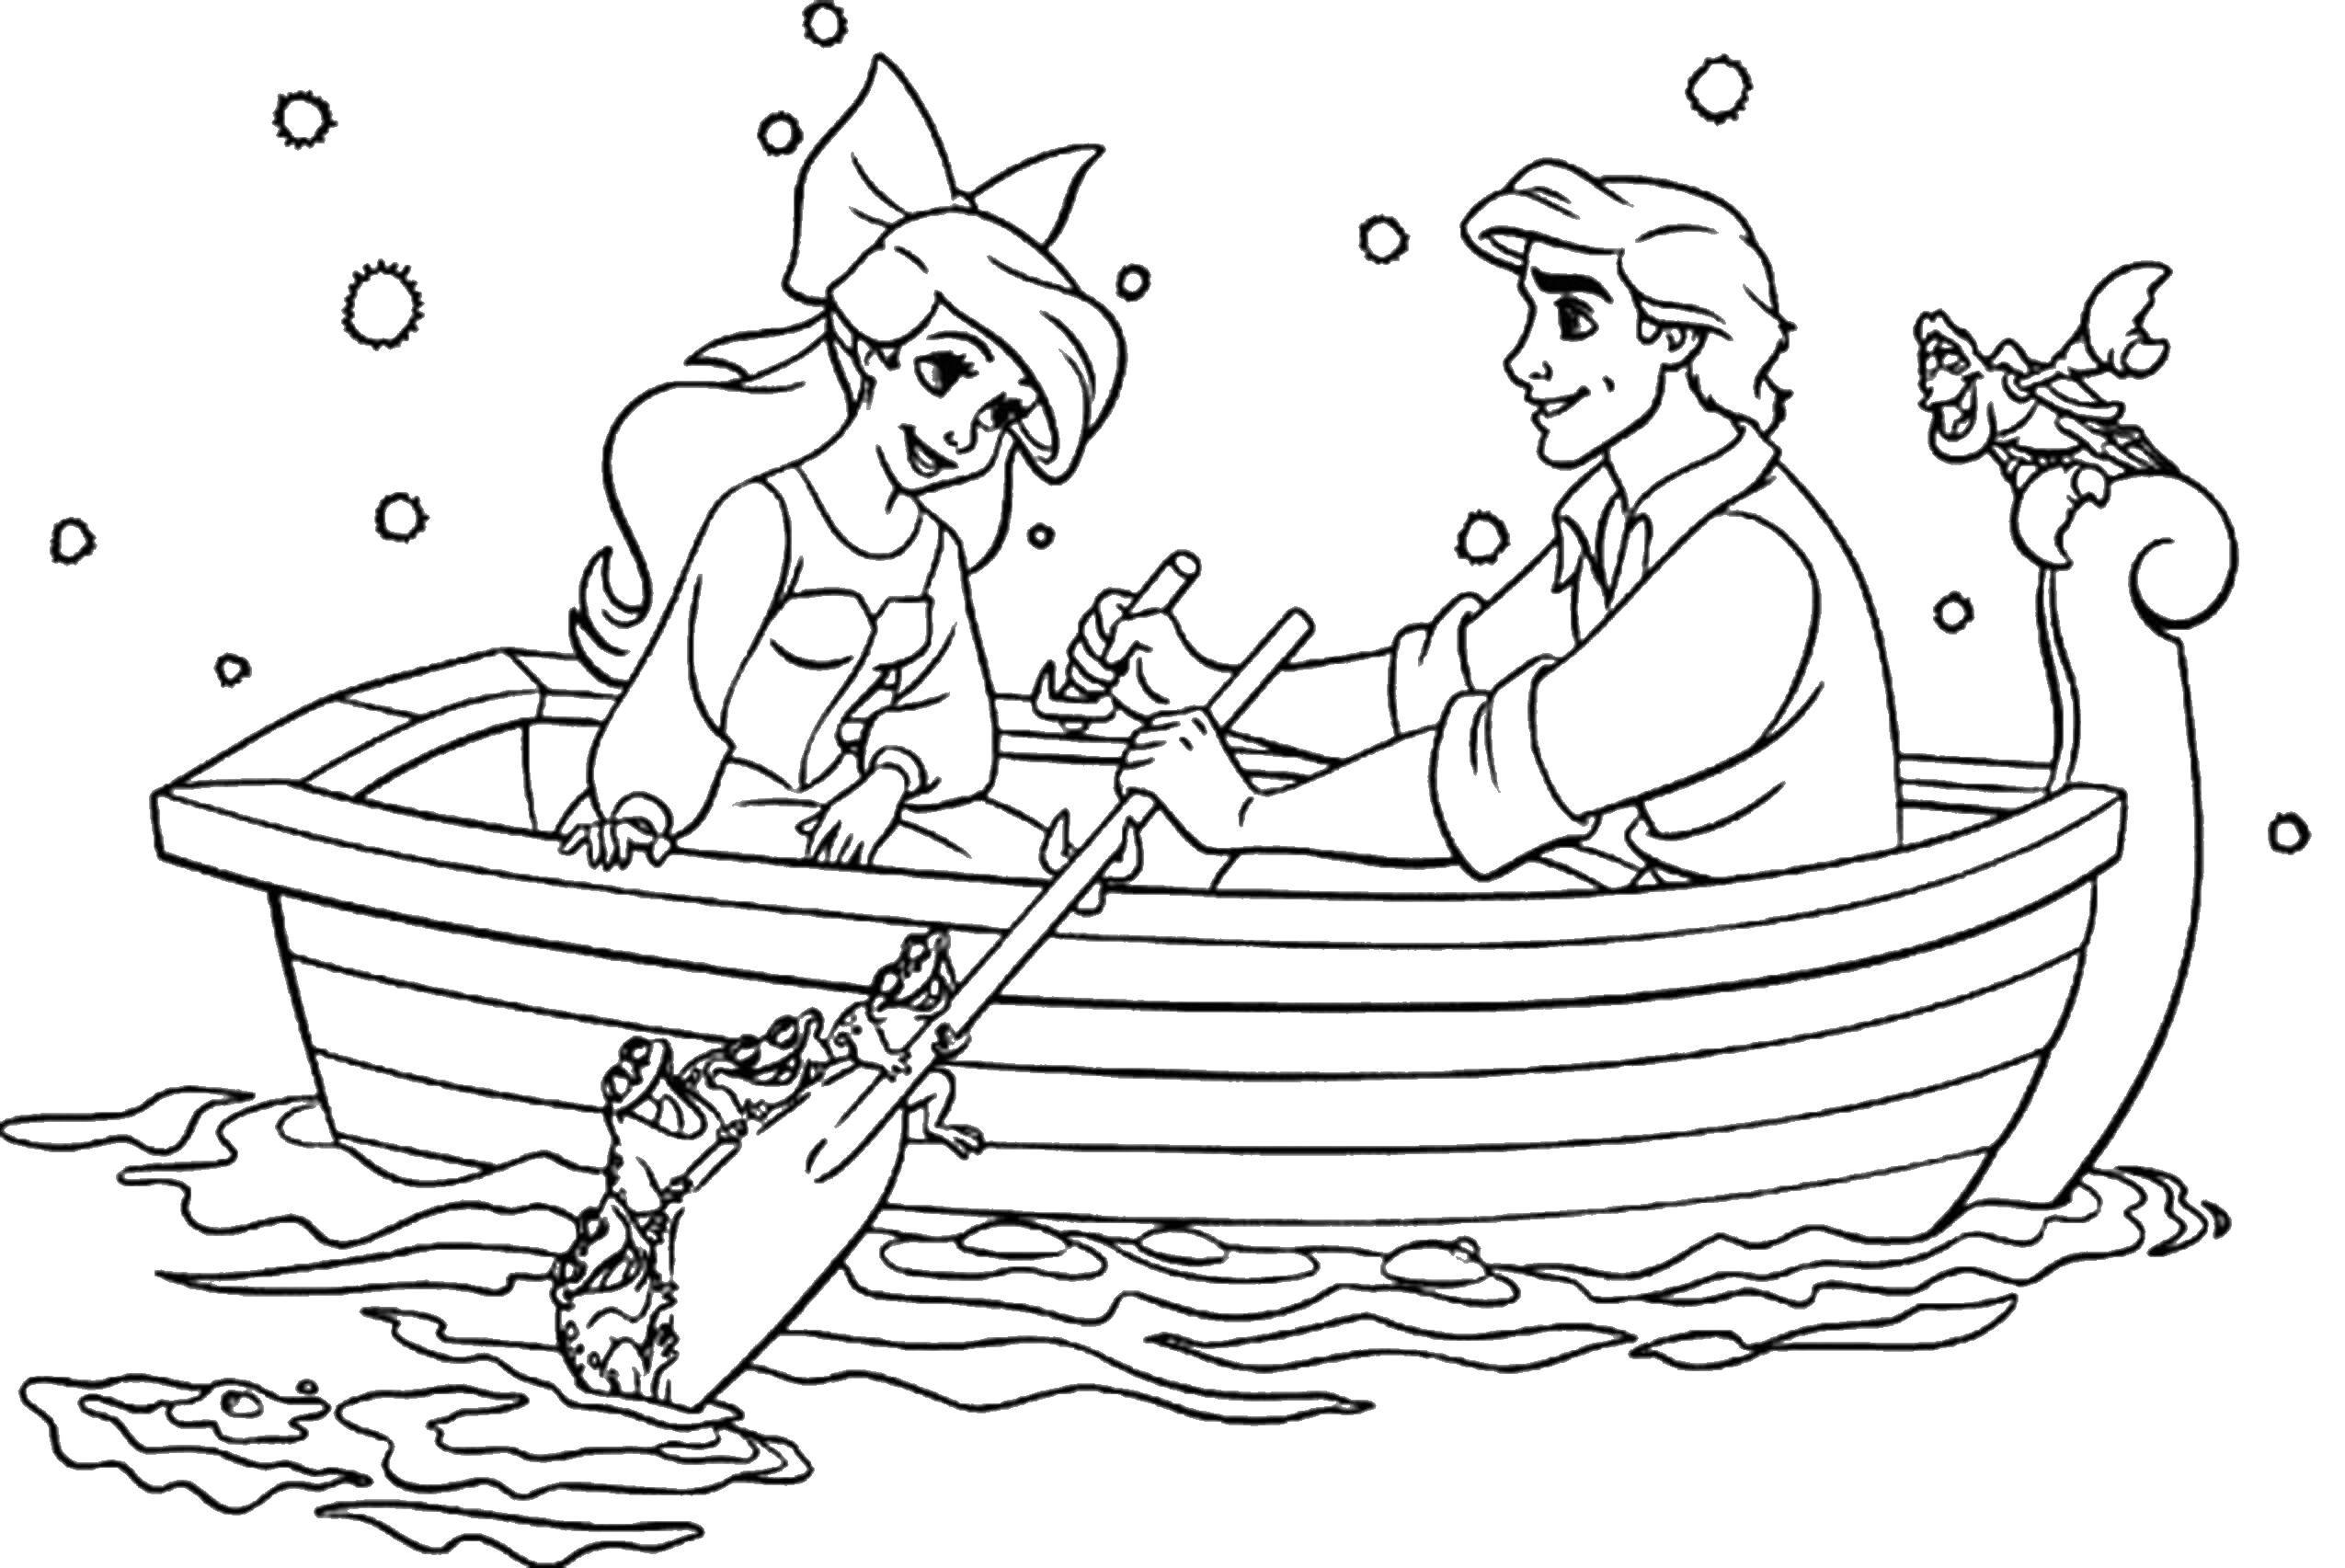 Coloring A romantic walk on the water. Category Disney coloring pages. Tags:  Disney, the little mermaid, Ariel.